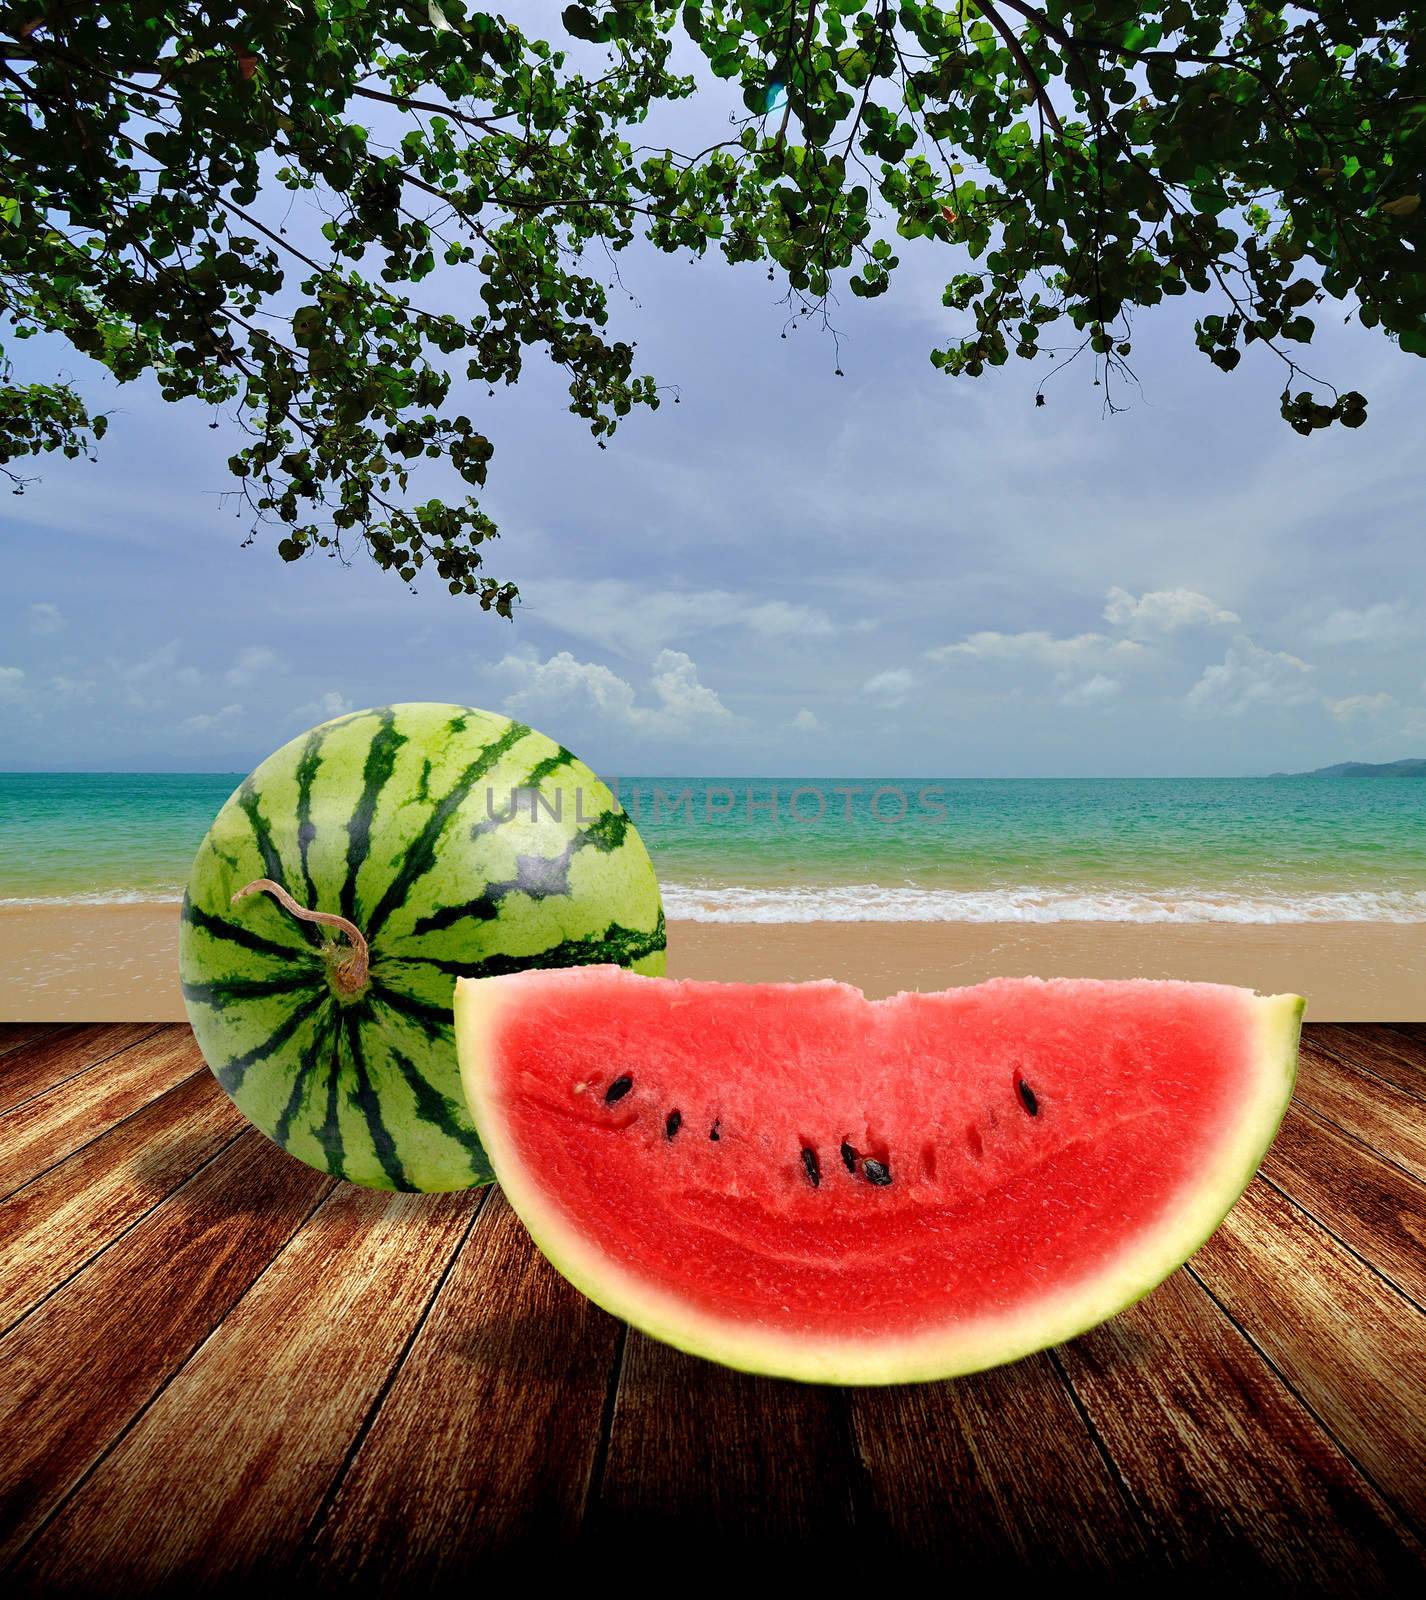 Watermelon from japan on beach, Summer concept